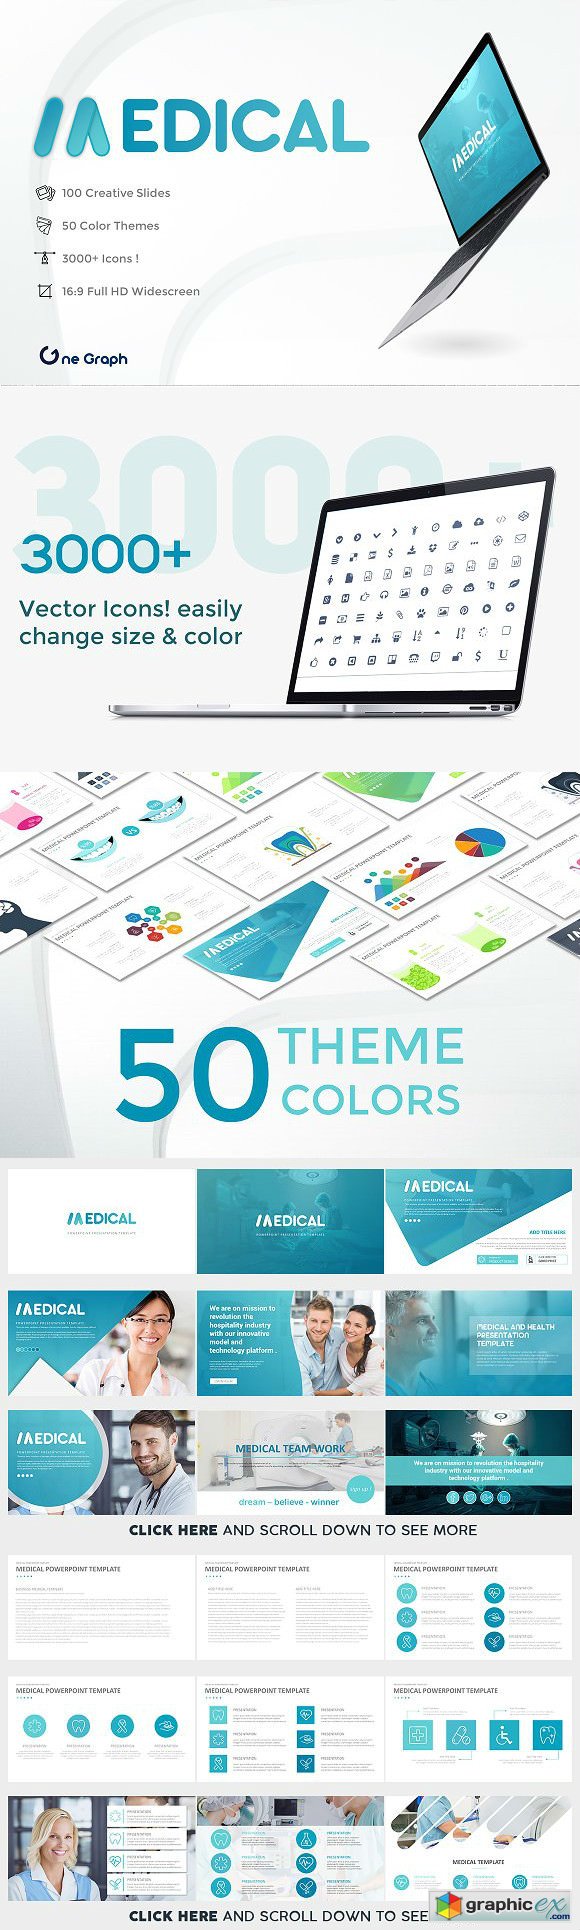 Medical PowerPoint Template 2036937